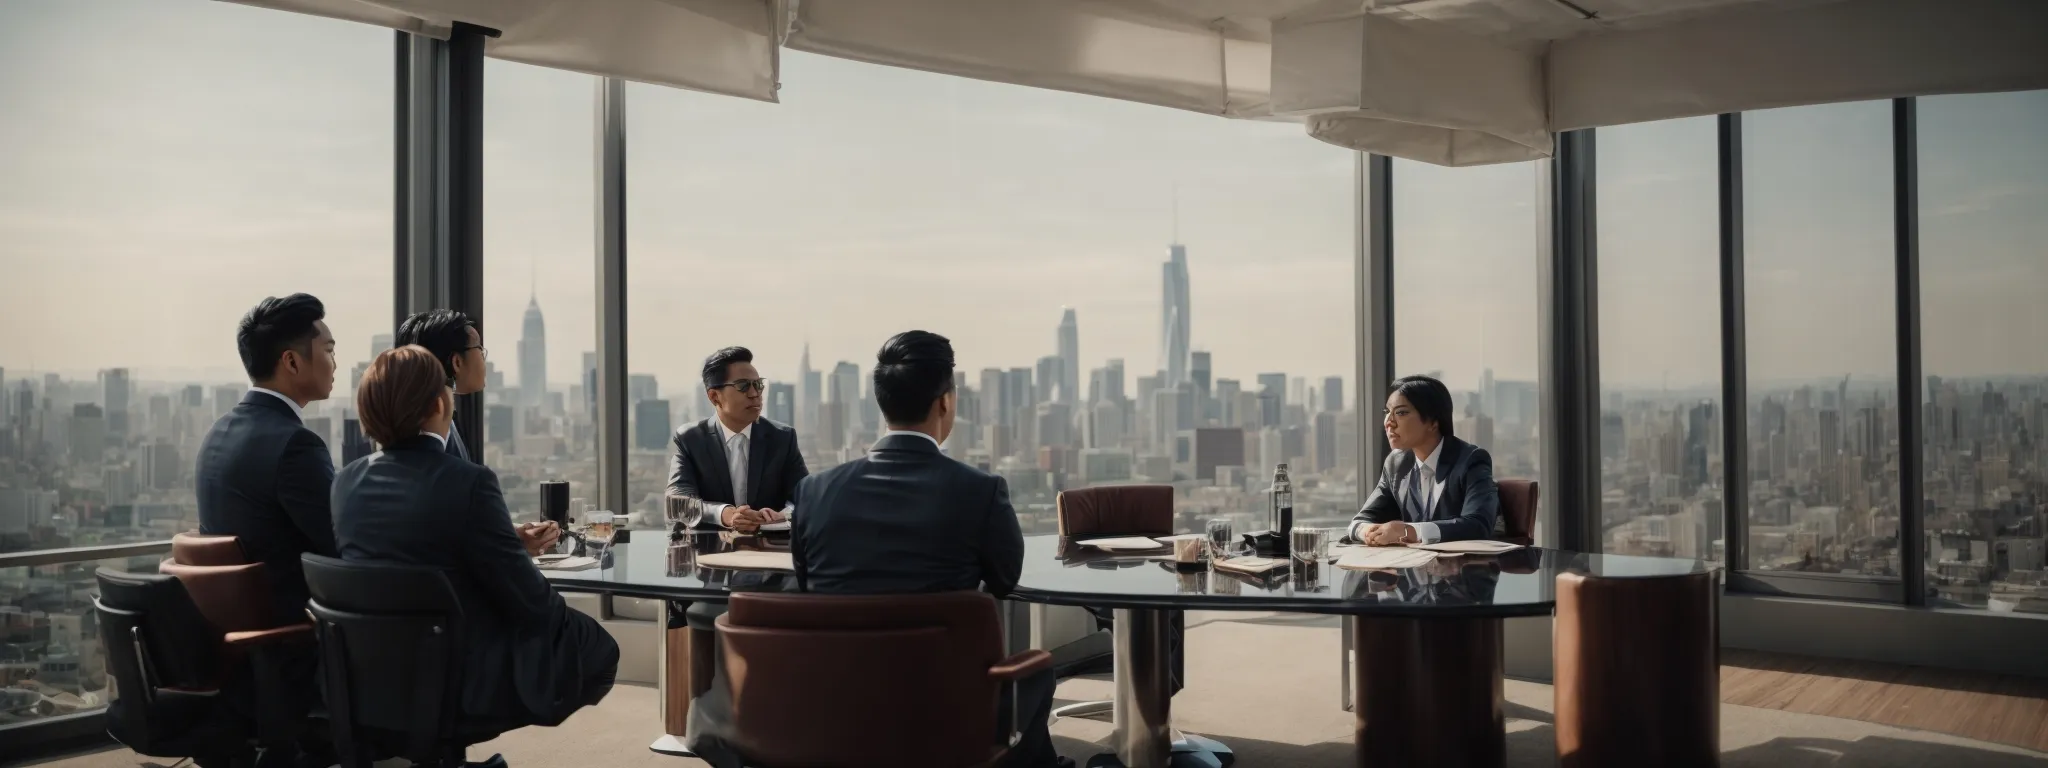 a strategic business meeting with a city skyline in the background.